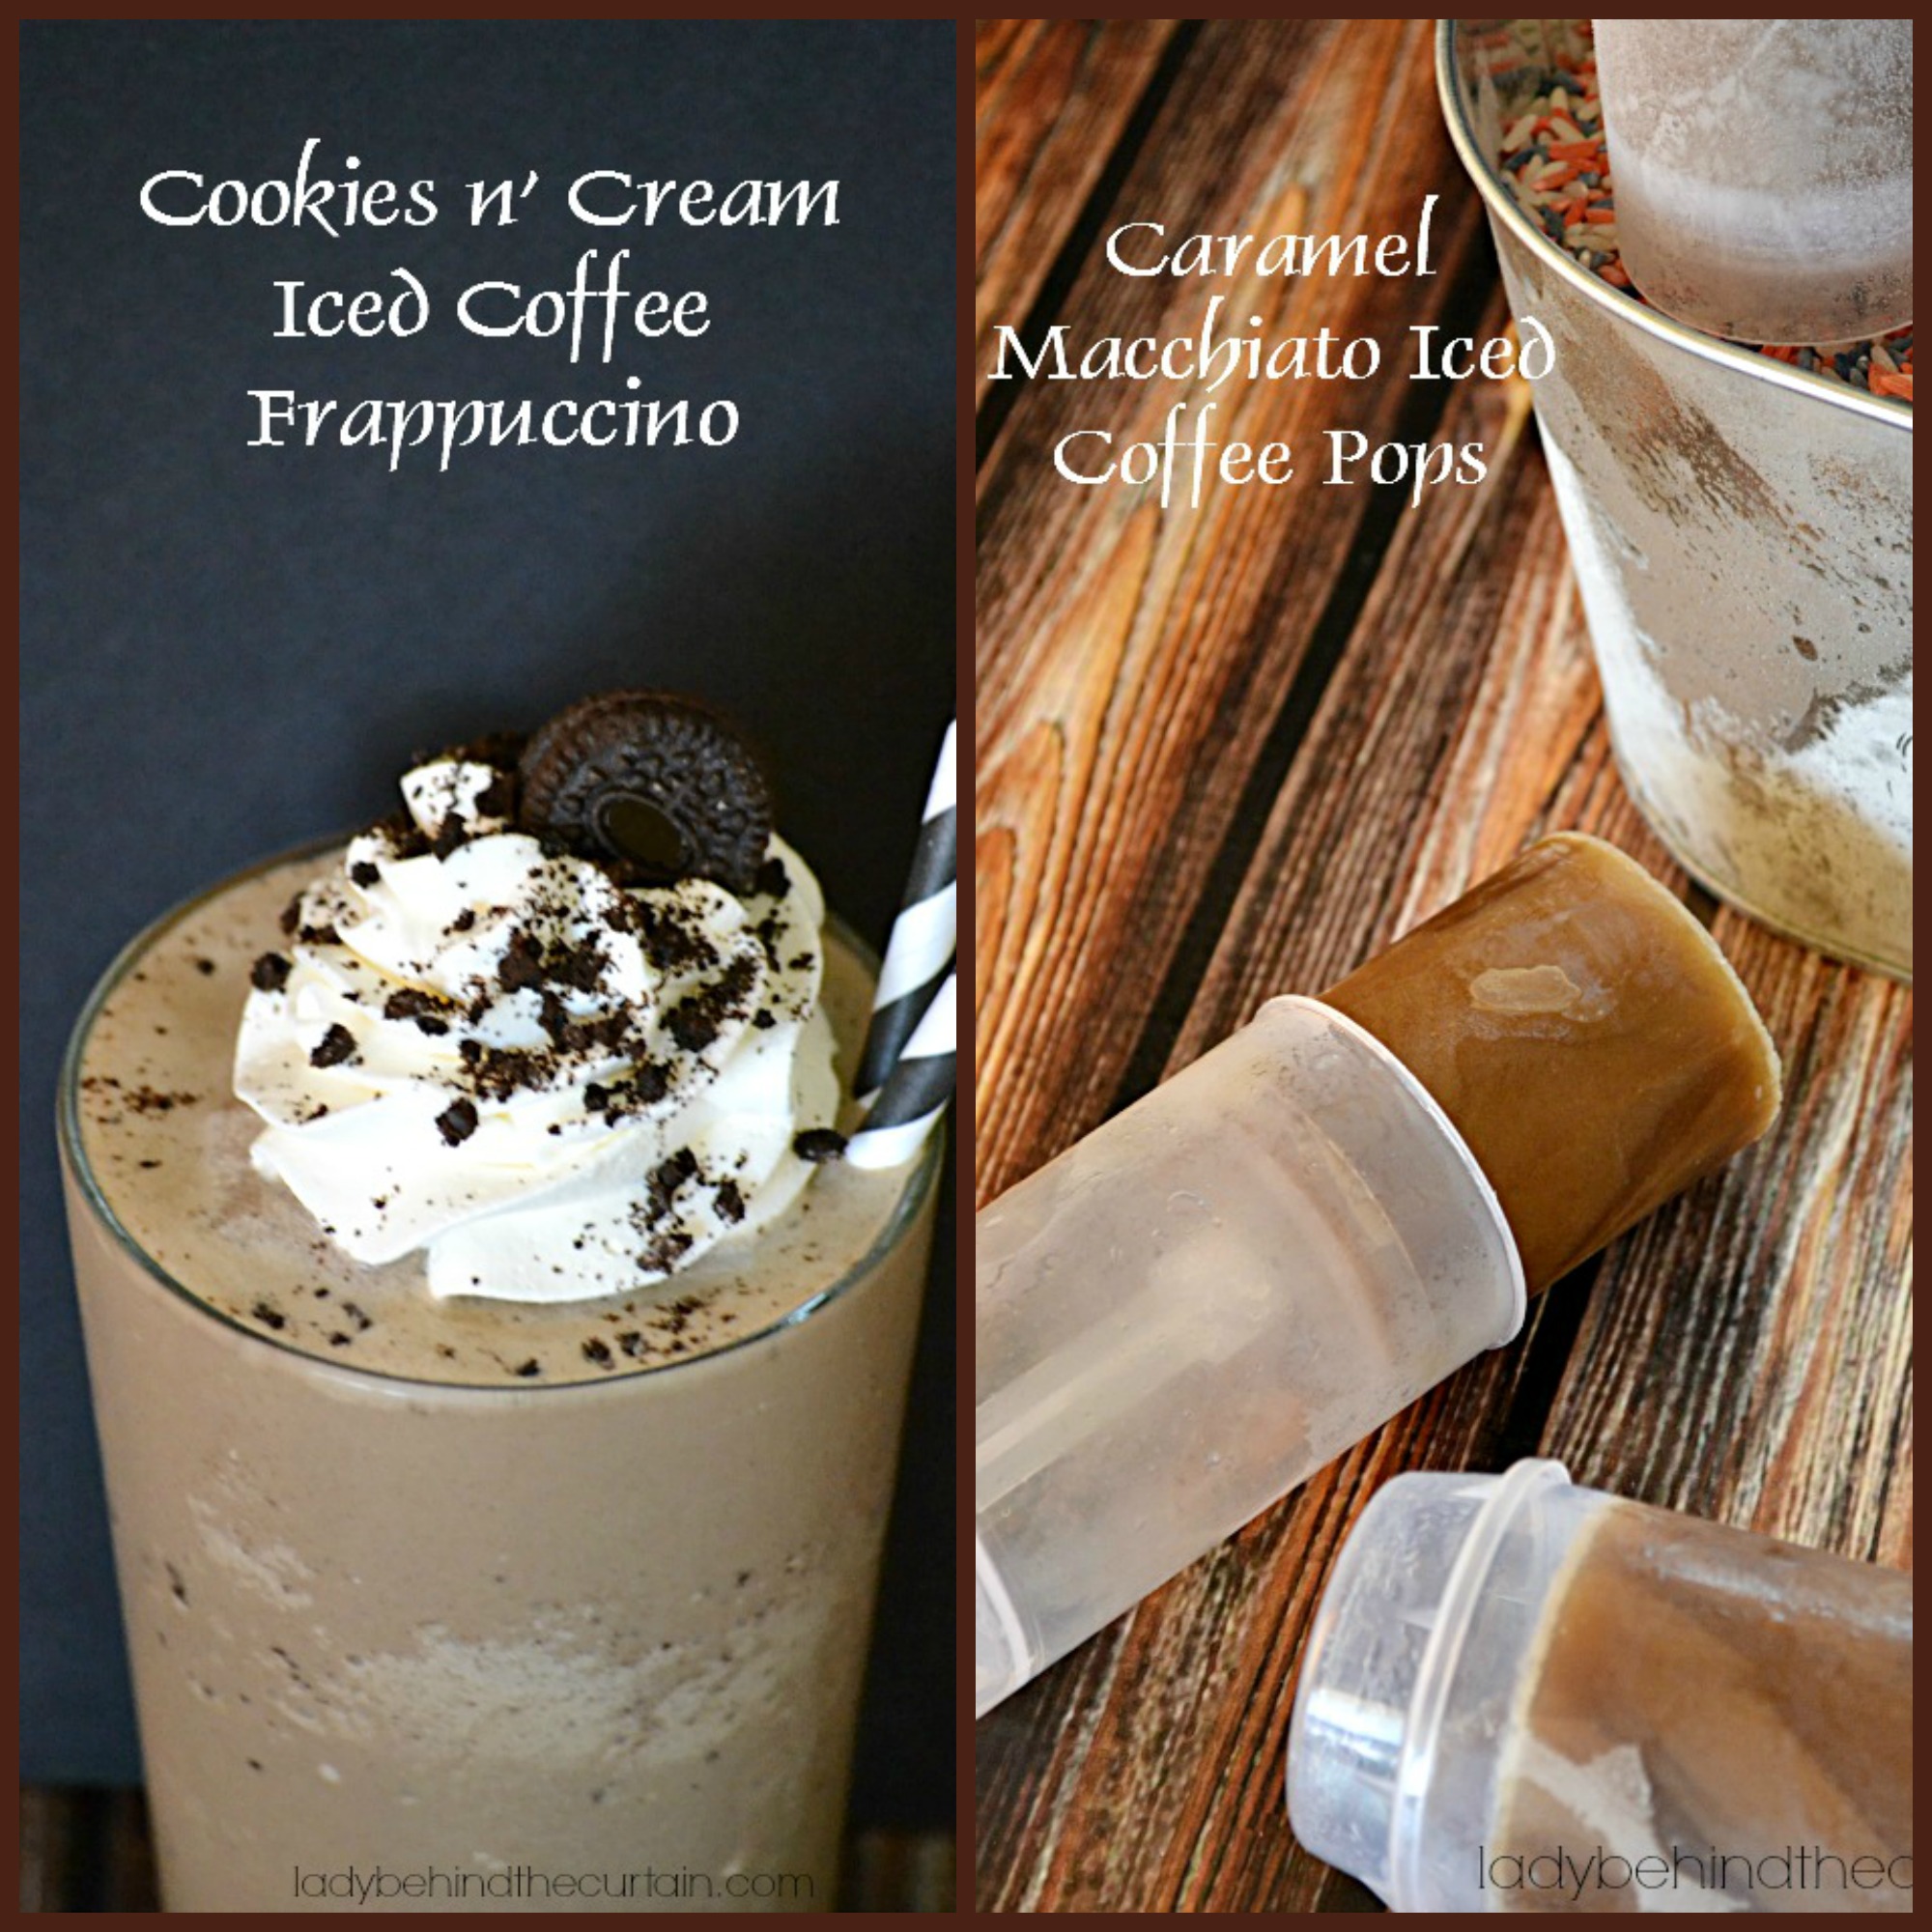 Cookies n’ Cream Iced Coffee Frappuccino and Caramel Macchiato Iced Coffee Pops